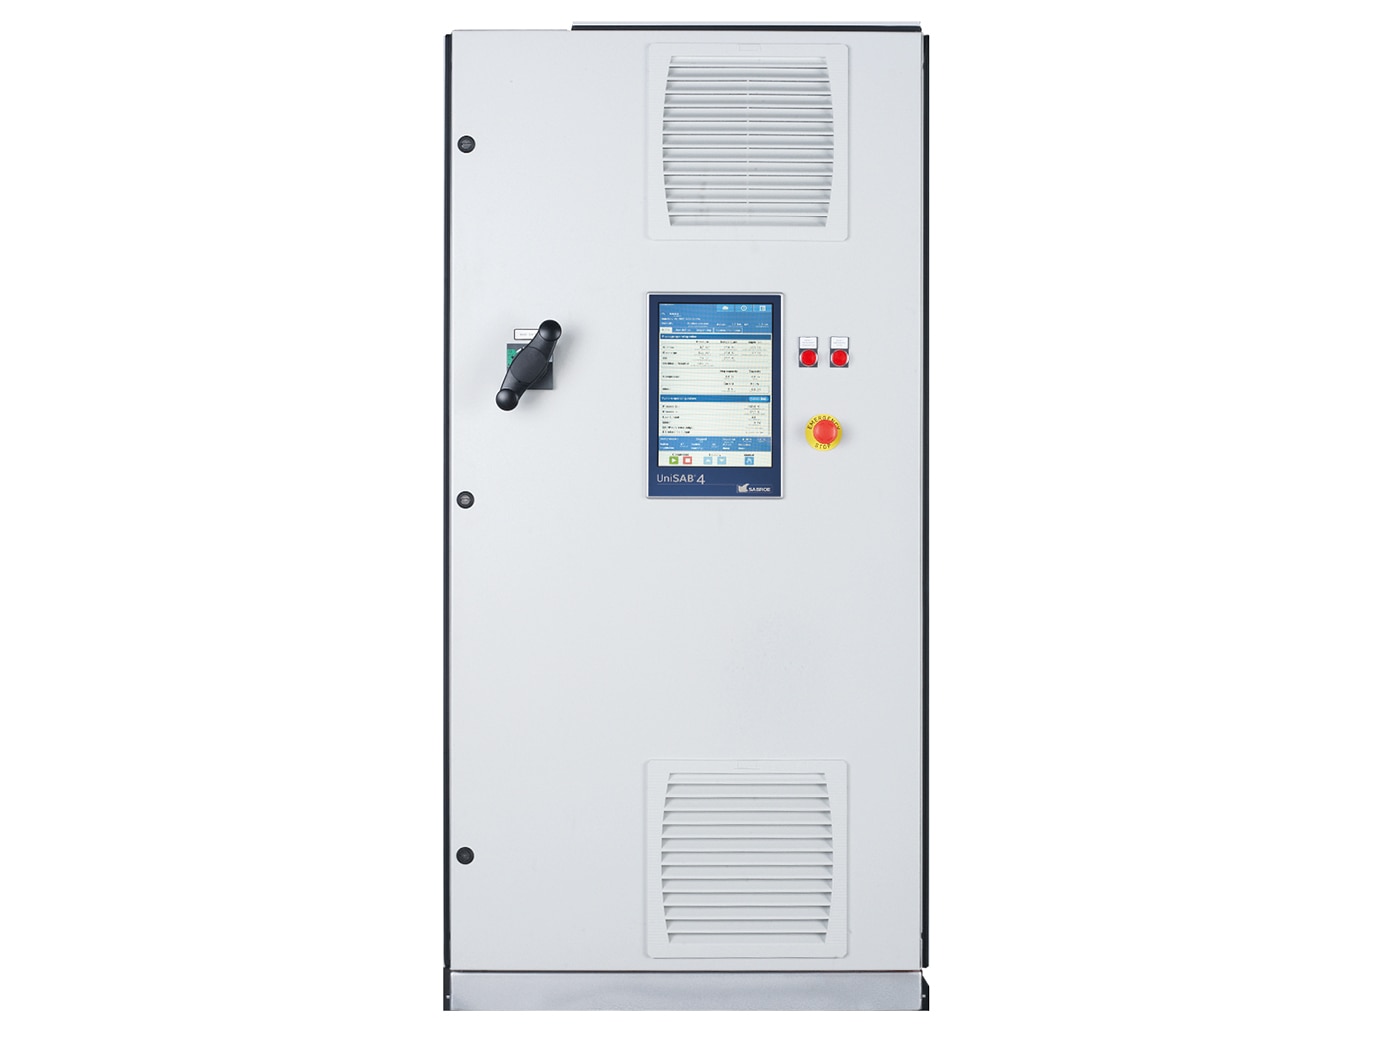 Sabroe variable-speed drive electrical panel